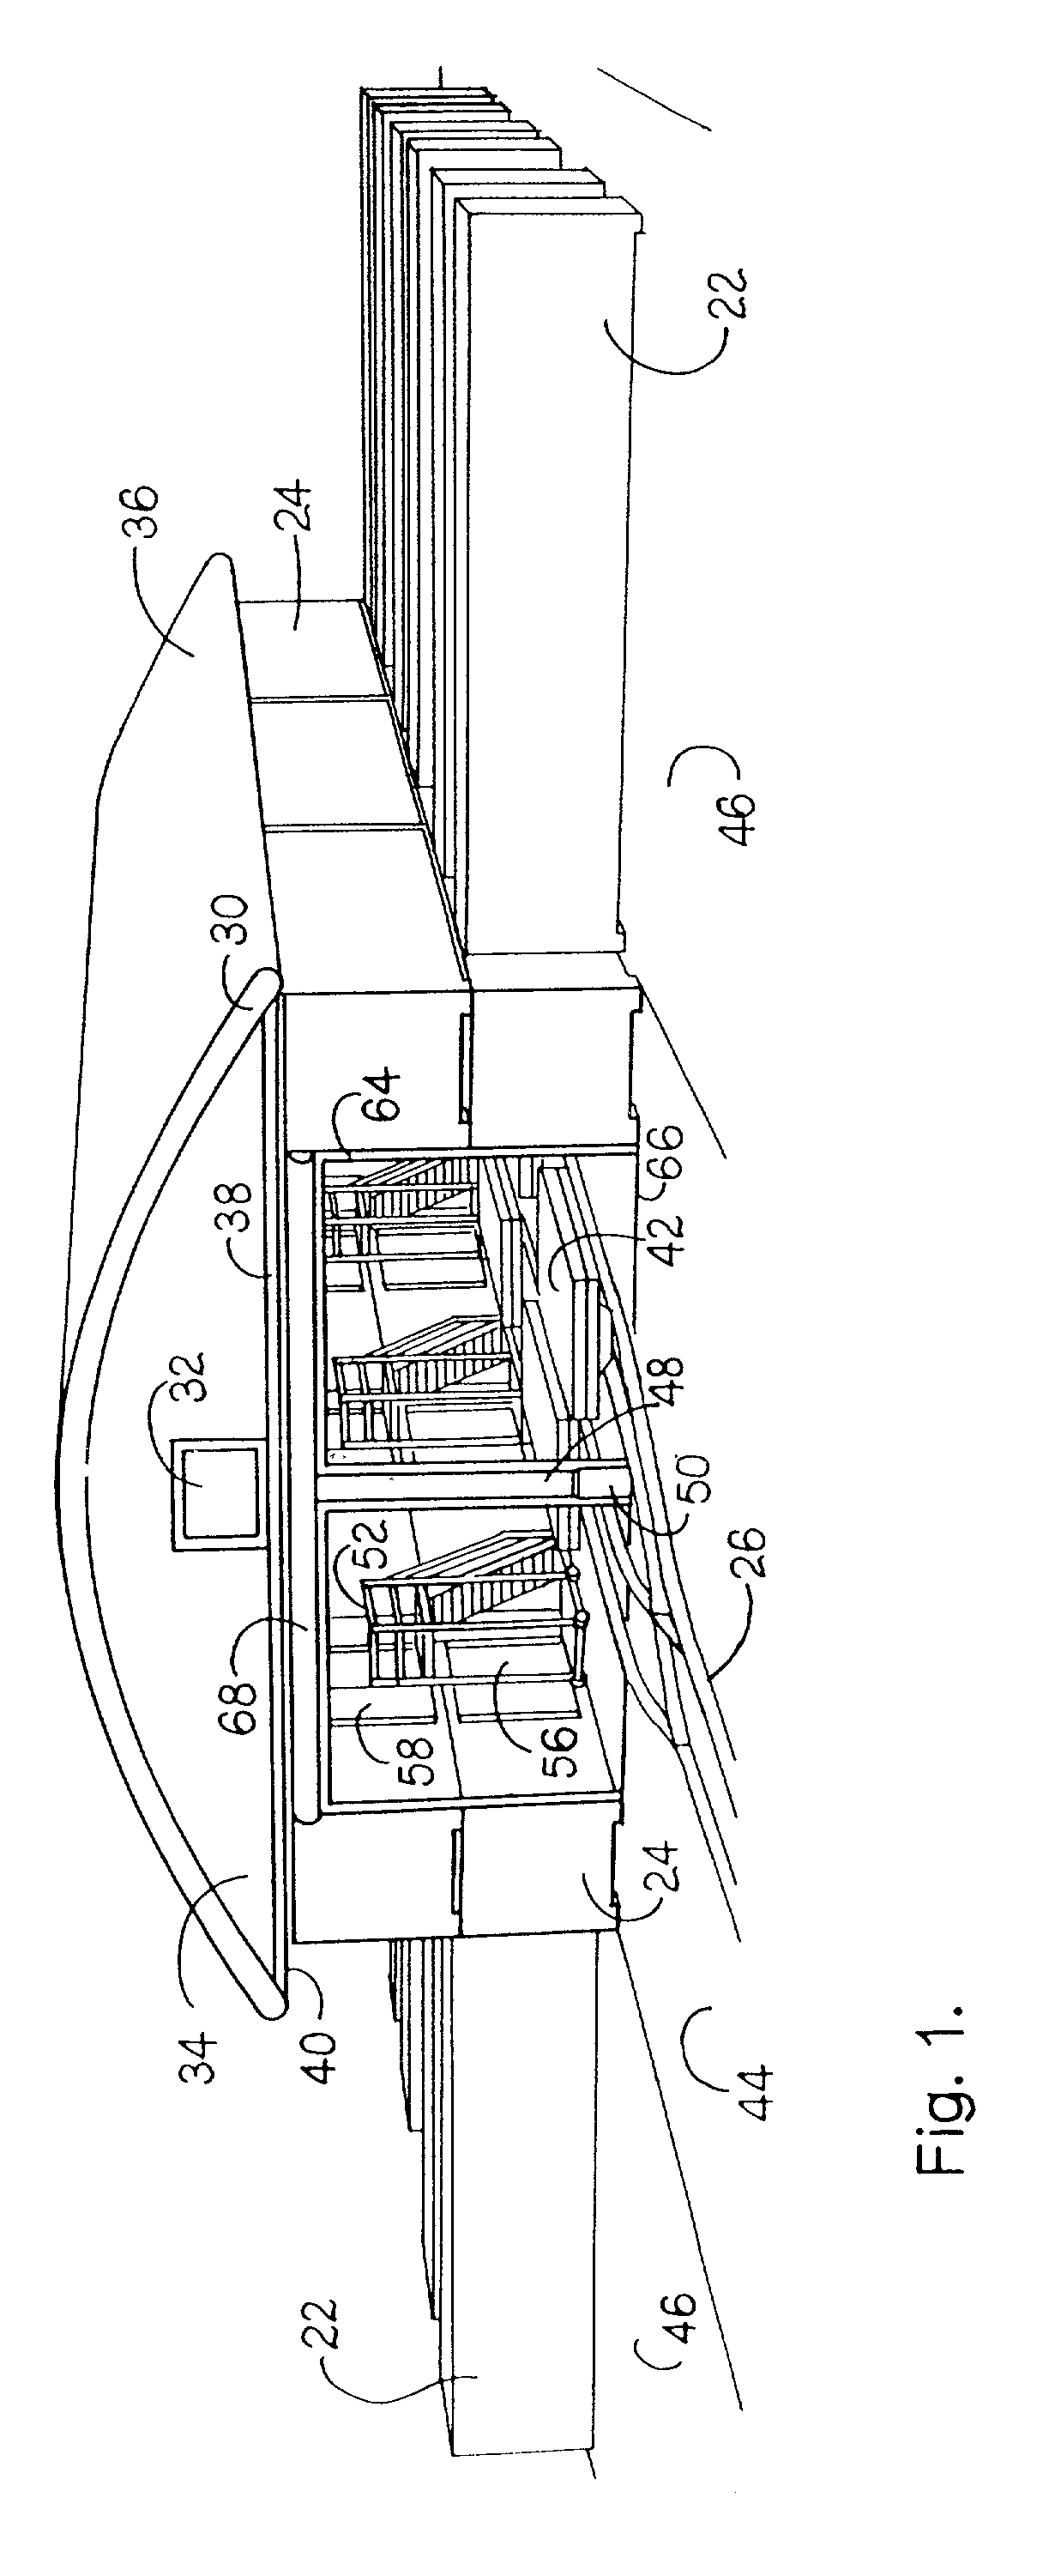 Portable modular factory structure and method of constructing same